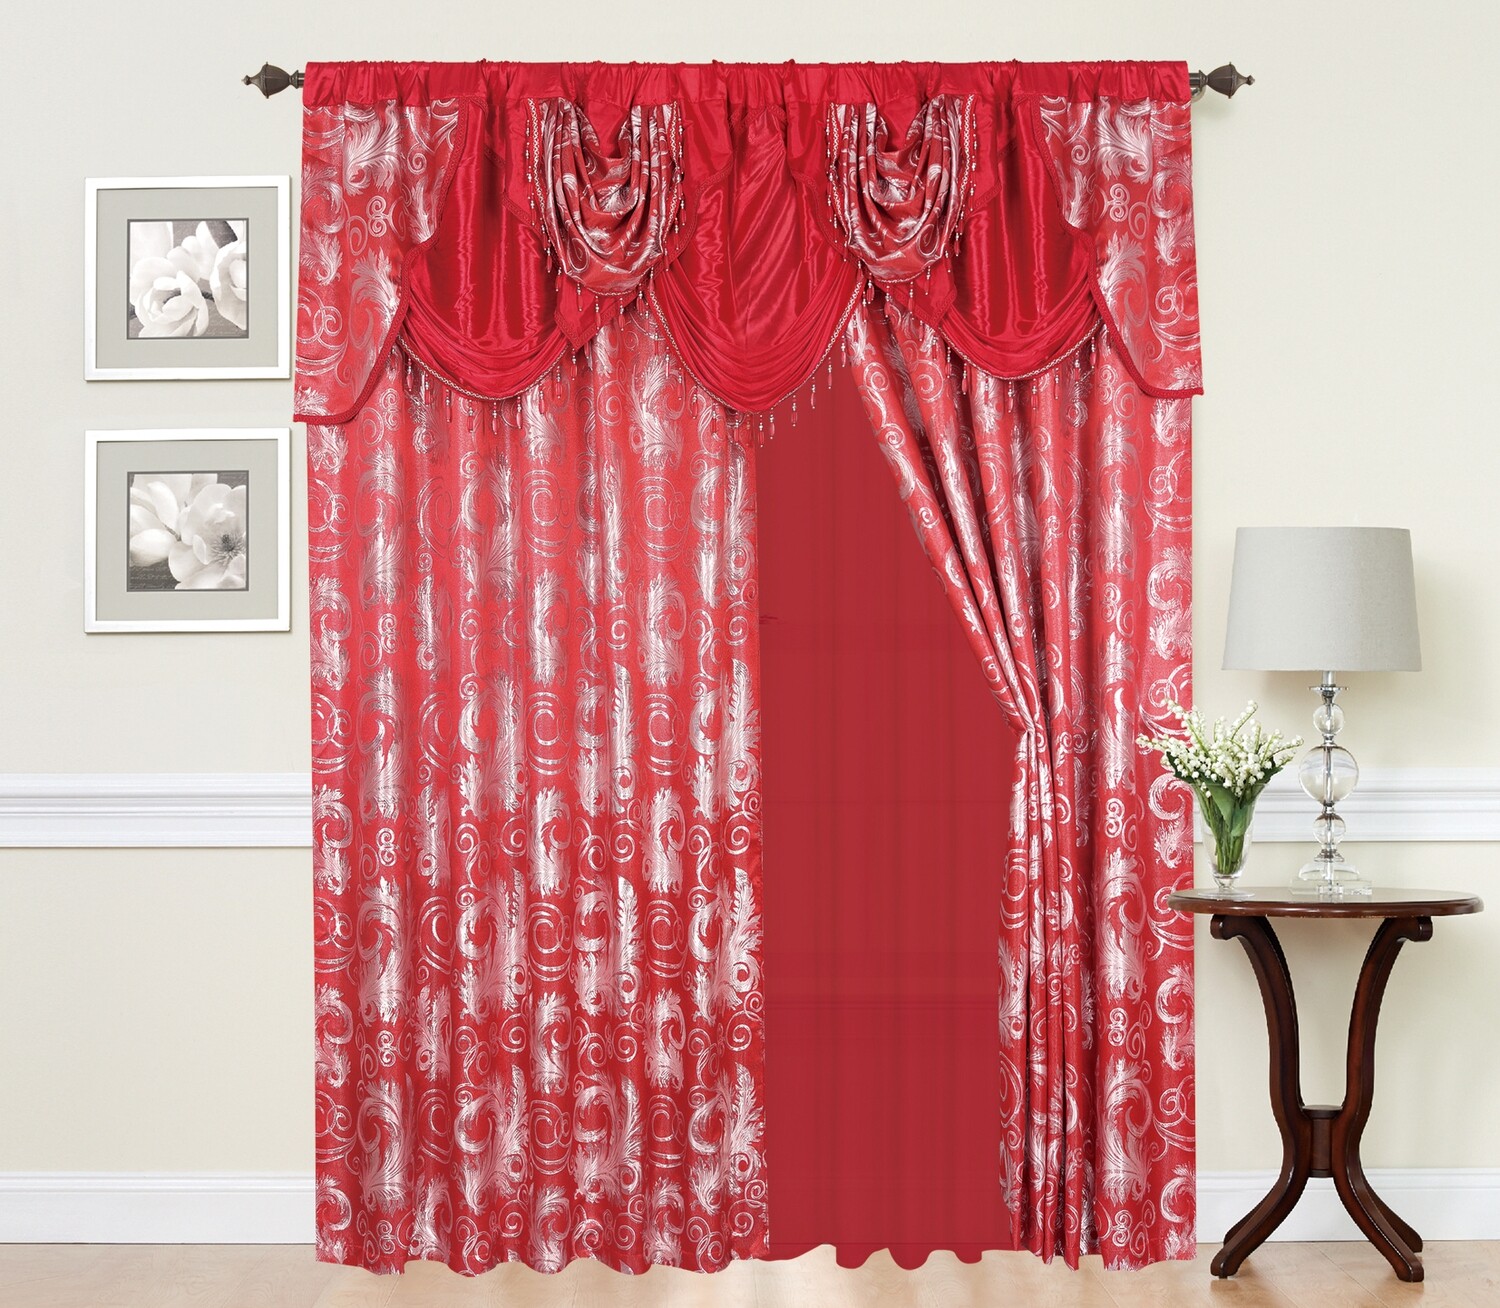 Glory Rugs Jacquard Luxury Curtain Window Panel Set Curtain with Attached Valance and Backing Bedroom Living Room Dining 110"X84" Each Jana Red and Silver